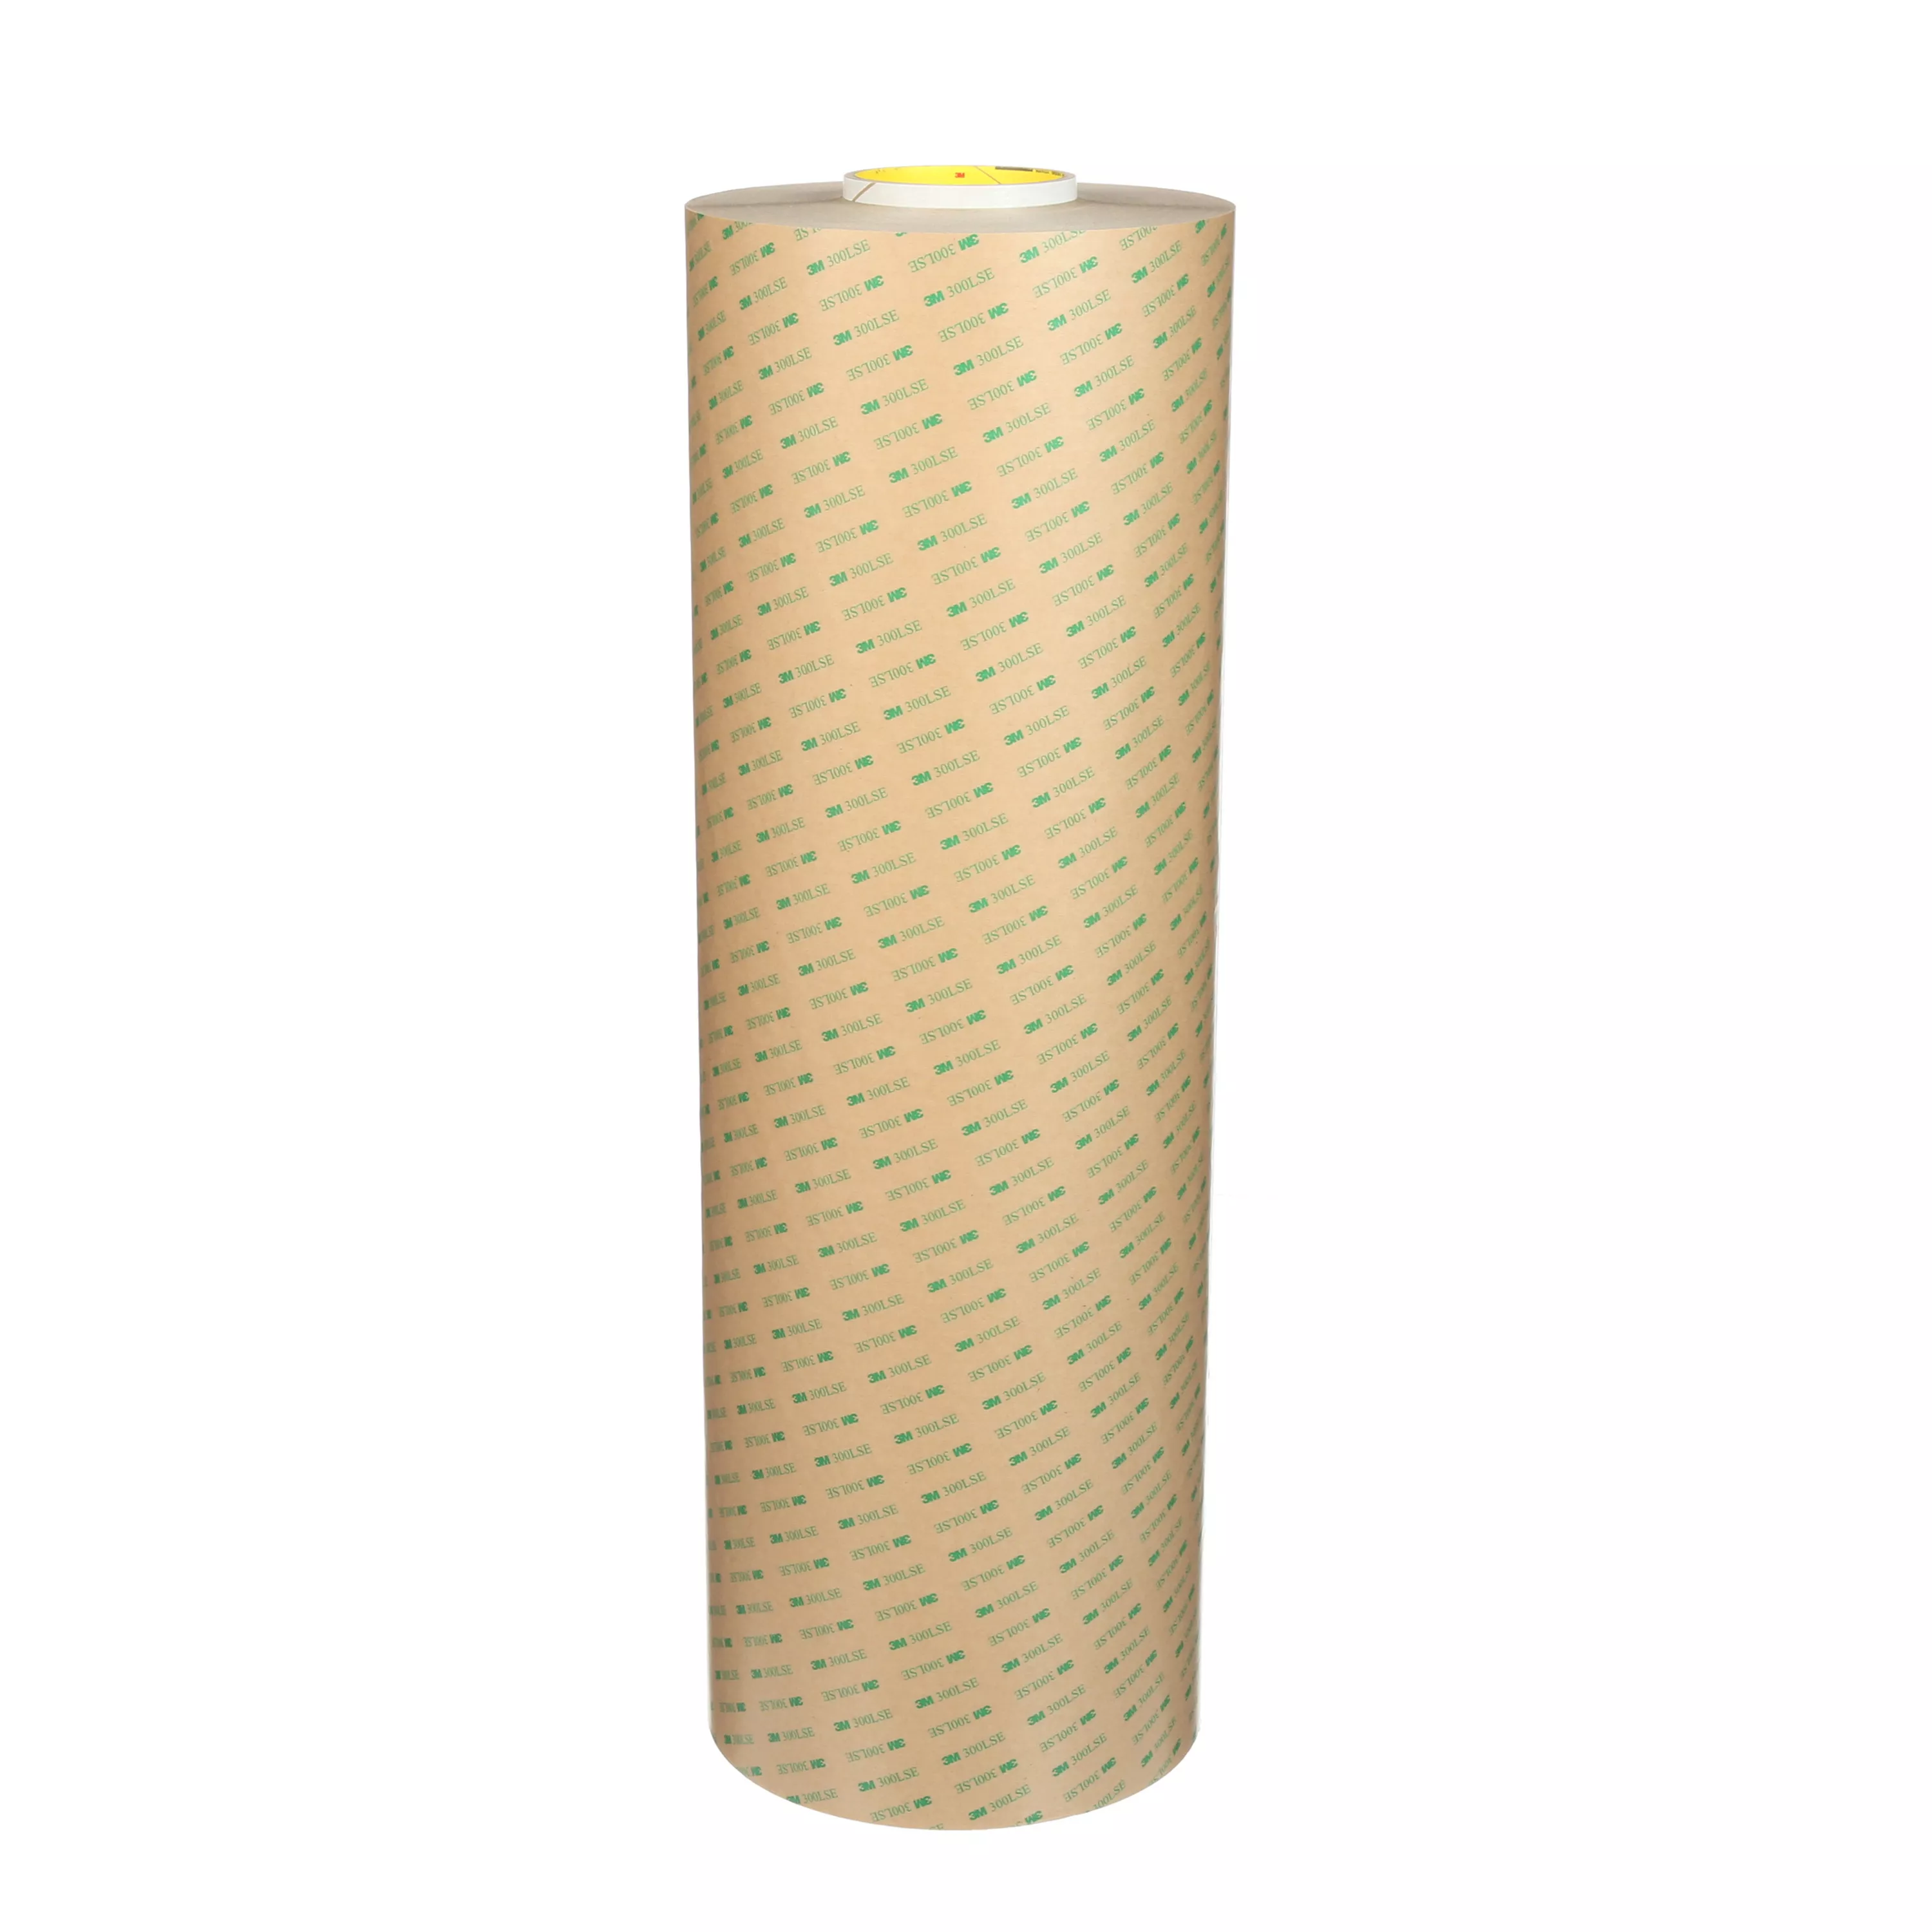 3M™ Adhesive Transfer Tape 9471LE, Clear, 27 in x 180 yd, 2.3 mil, 1
Roll/Case